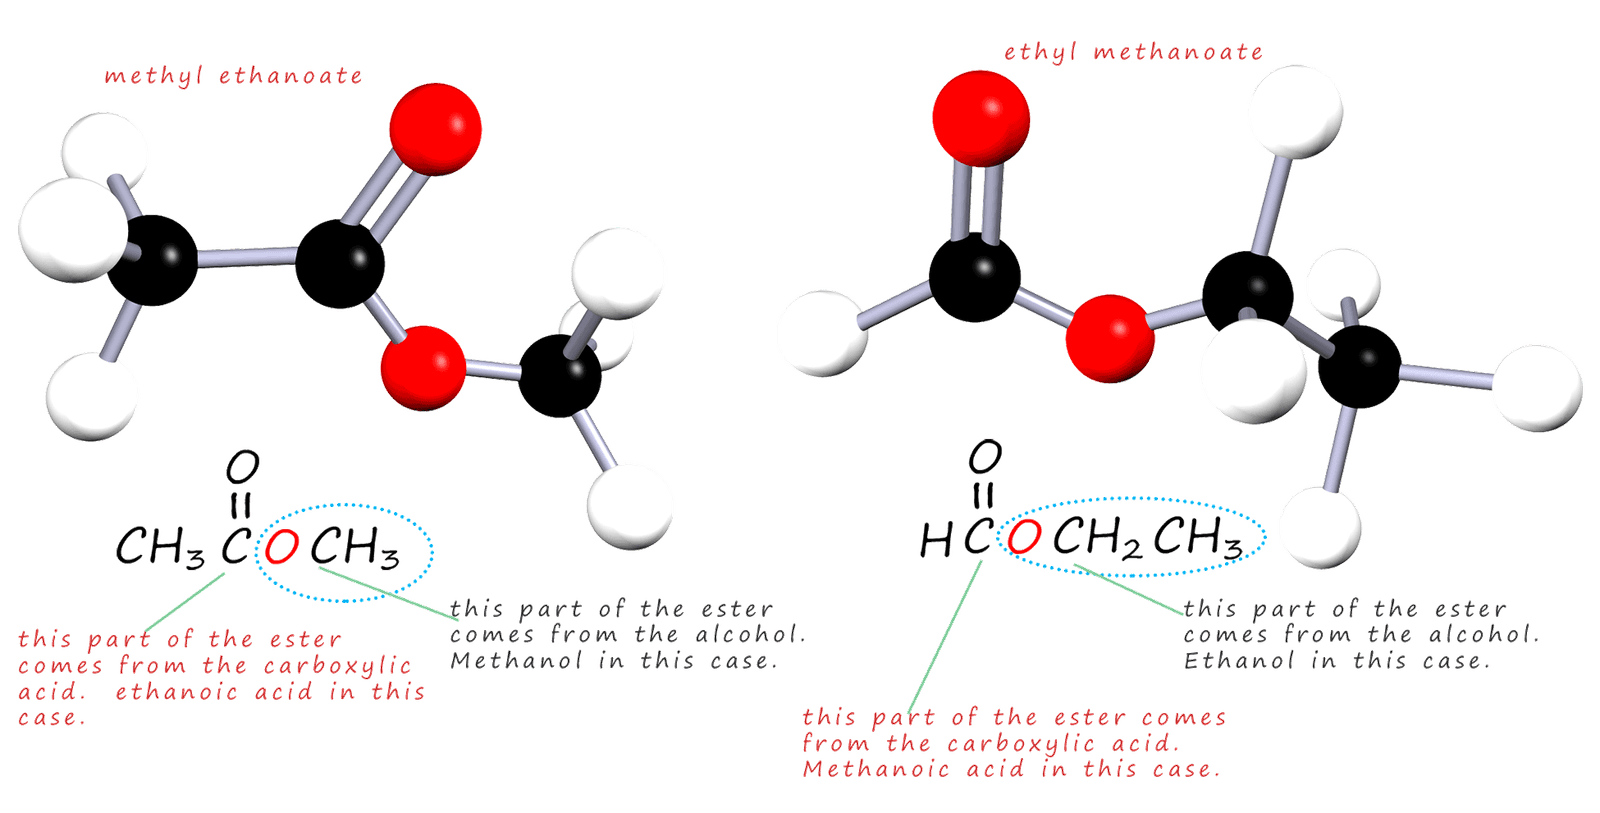 3d models to show the structure of methyl ethanoate and ethyl methanoate and how these esters are formed.